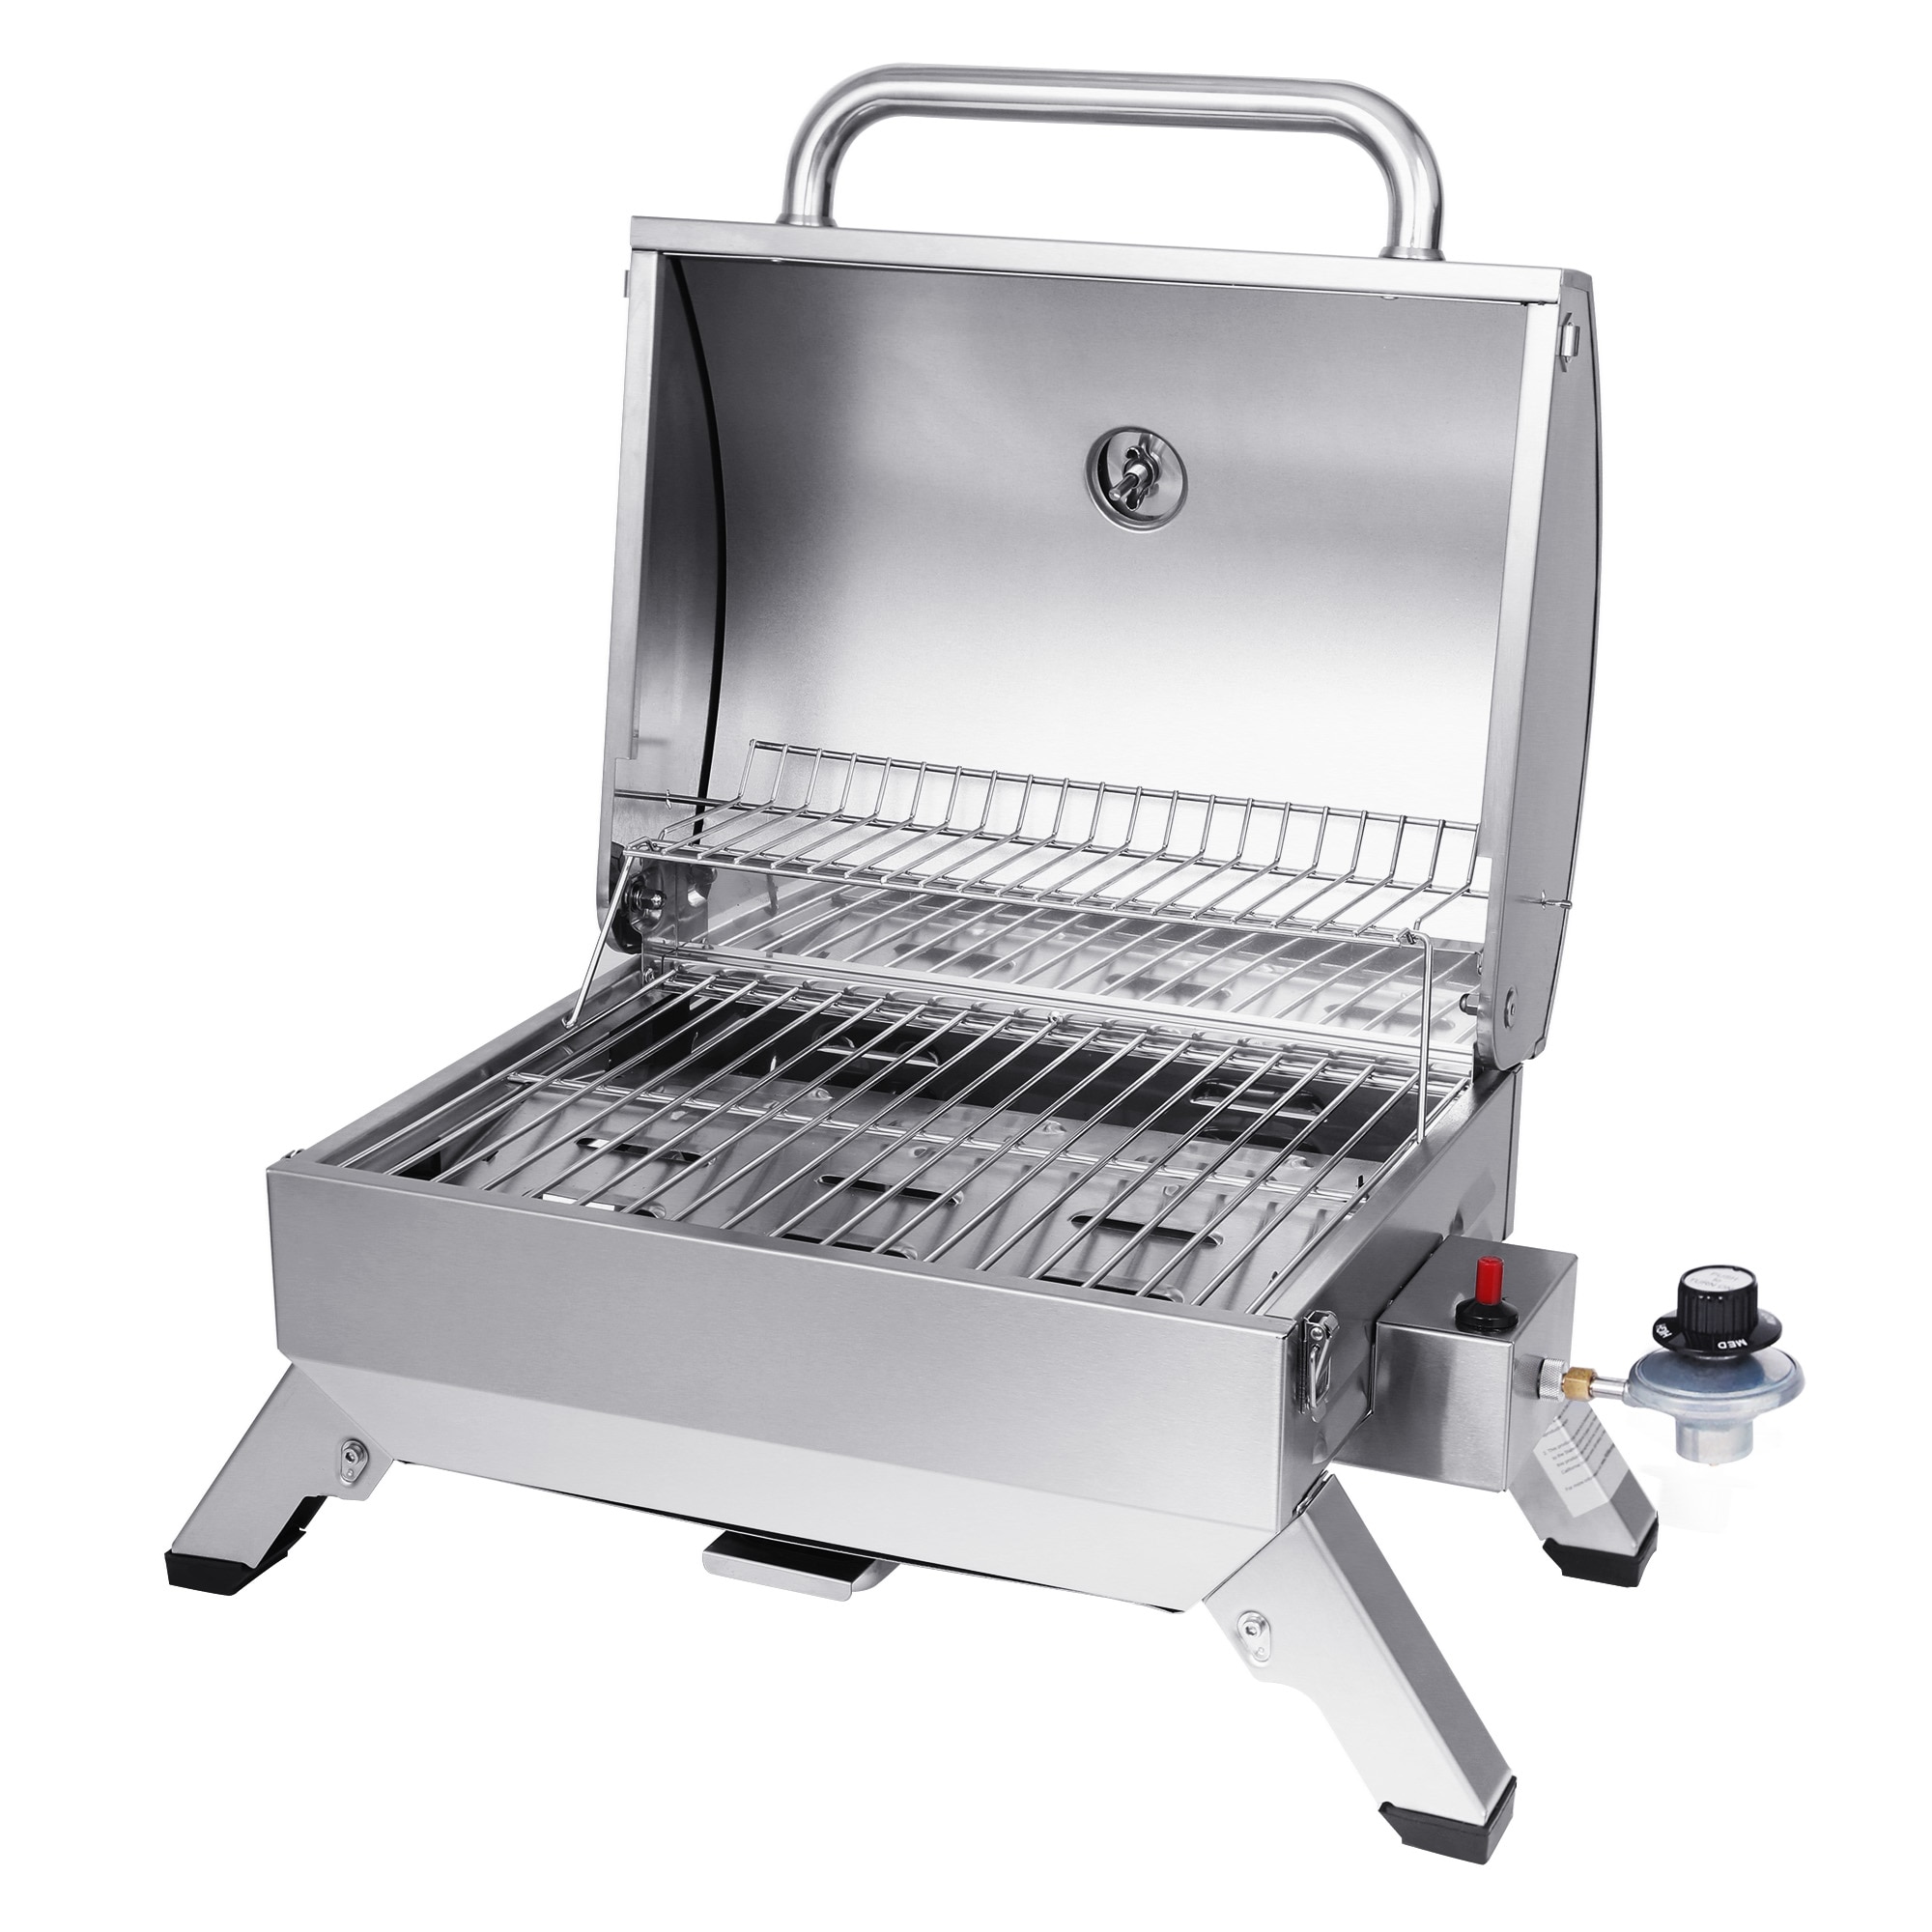 Royal Gourmet 285 Sq.-in Stainless Steel Portable Gas Grill in the 